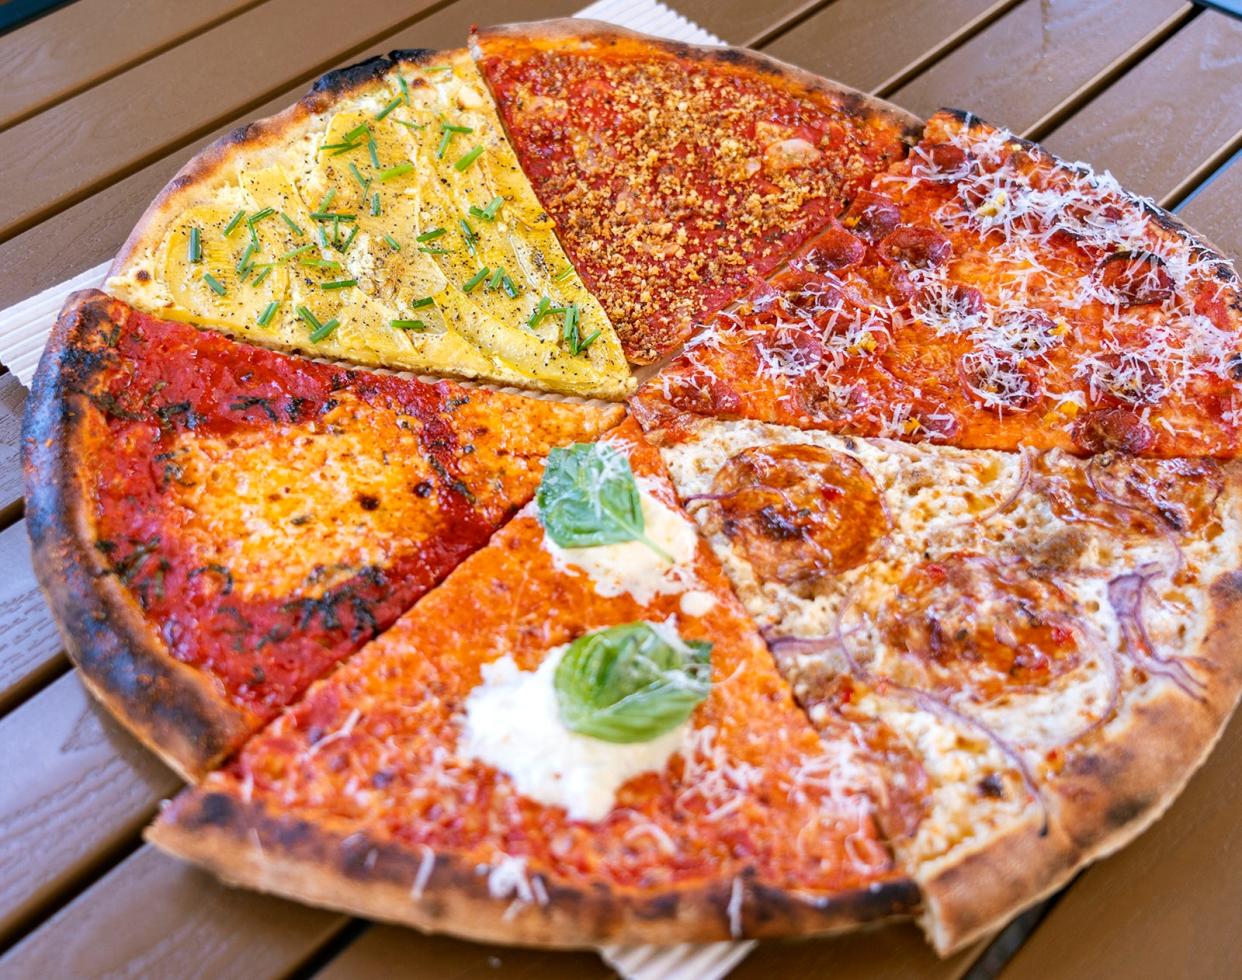 The sampler at Allday Pizza gives you a chance to try each pizza on offer.